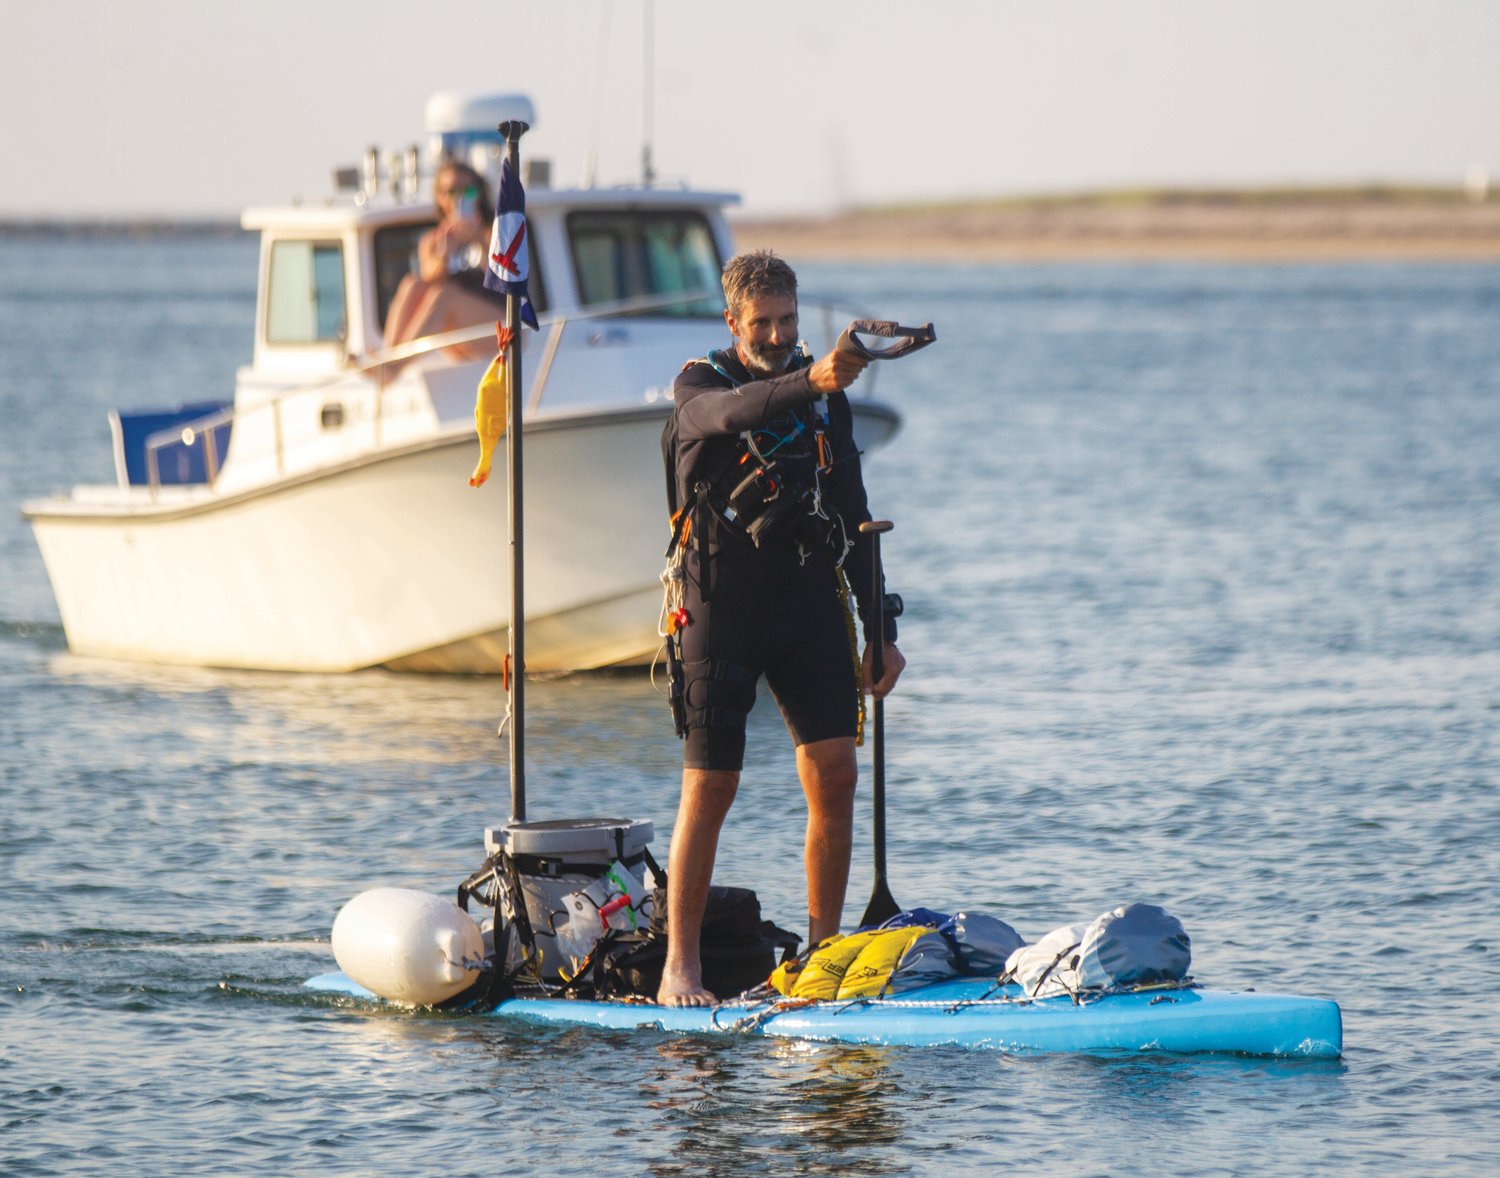 Adam Nagler approaches Nantucket at the conclusion of his epic paddle-board odyssey that began in the waters off Virginia.